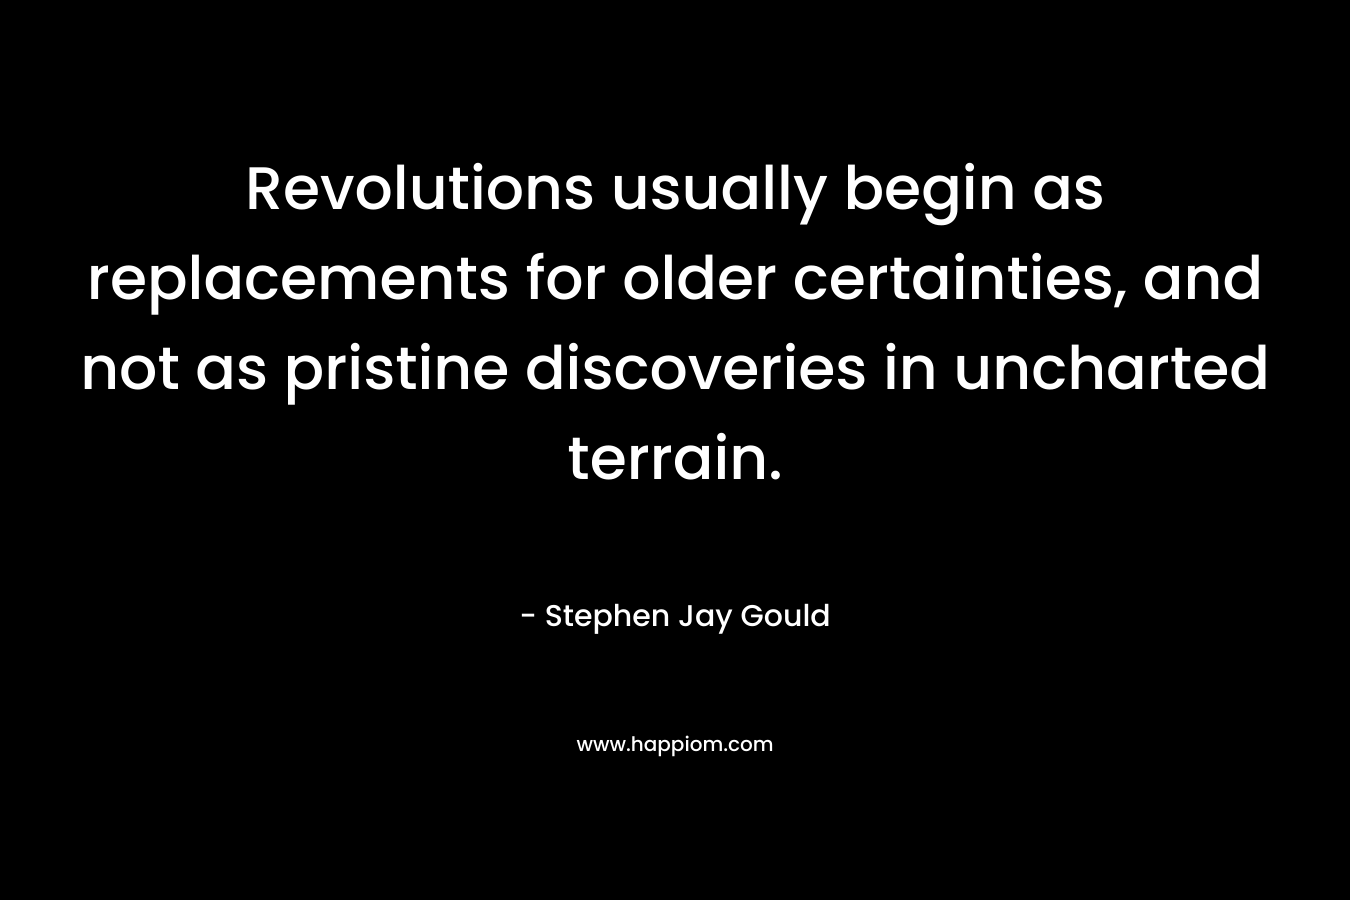 Revolutions usually begin as replacements for older certainties, and not as pristine discoveries in uncharted terrain. – Stephen Jay Gould